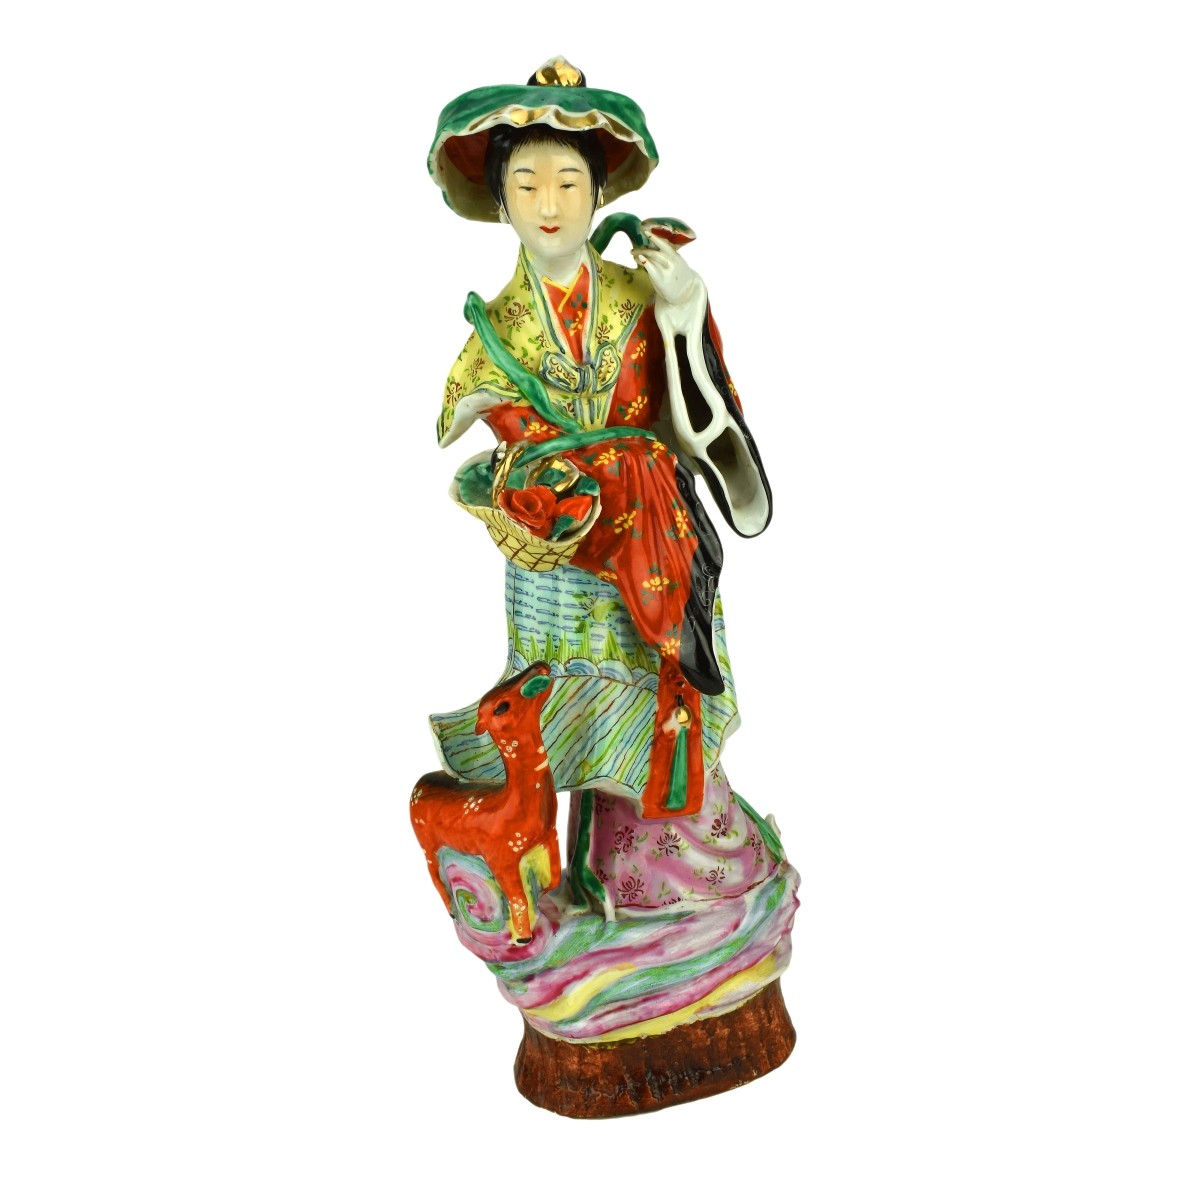 Chinese Porcelain Shou Xing and Lady Figures